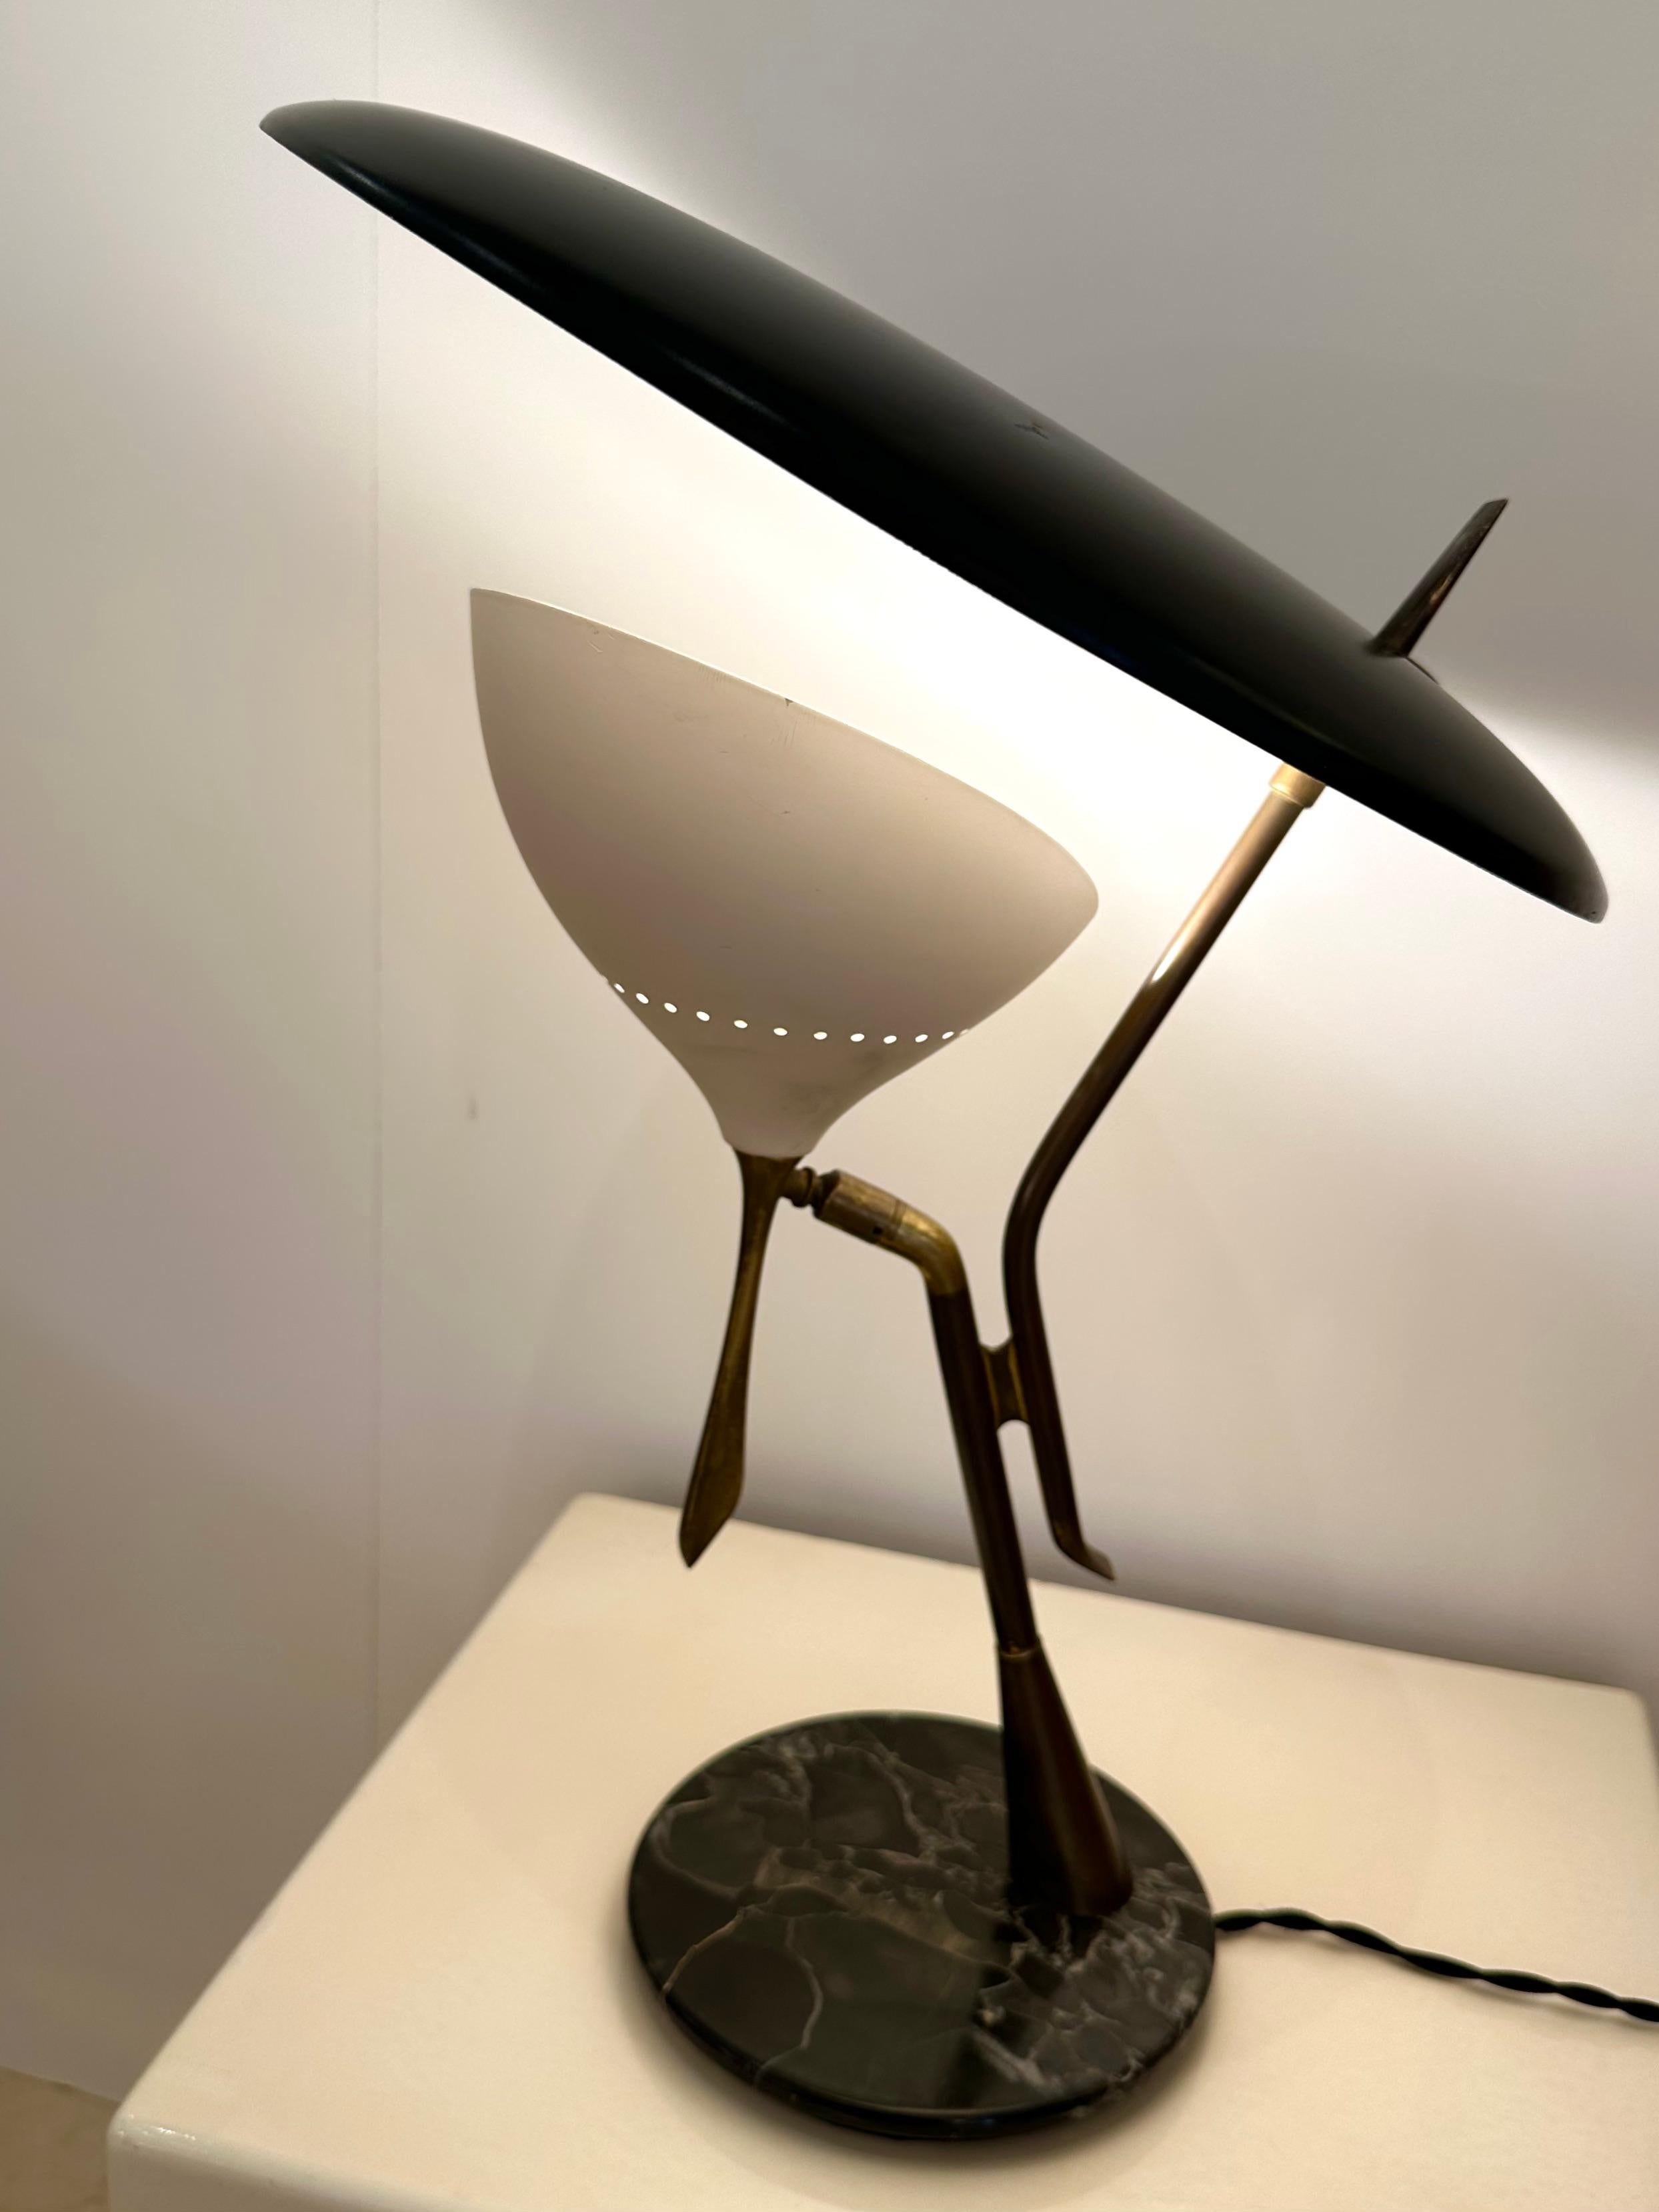 Rare Mid-Century Modern Desk table lamp by the italian editor manufacture Lumen in brass, original black and white lacquered painted metal not repainted, brass adjustable arm and shade, marble base. Famous design like Reggiani, Sciolari, Francesco